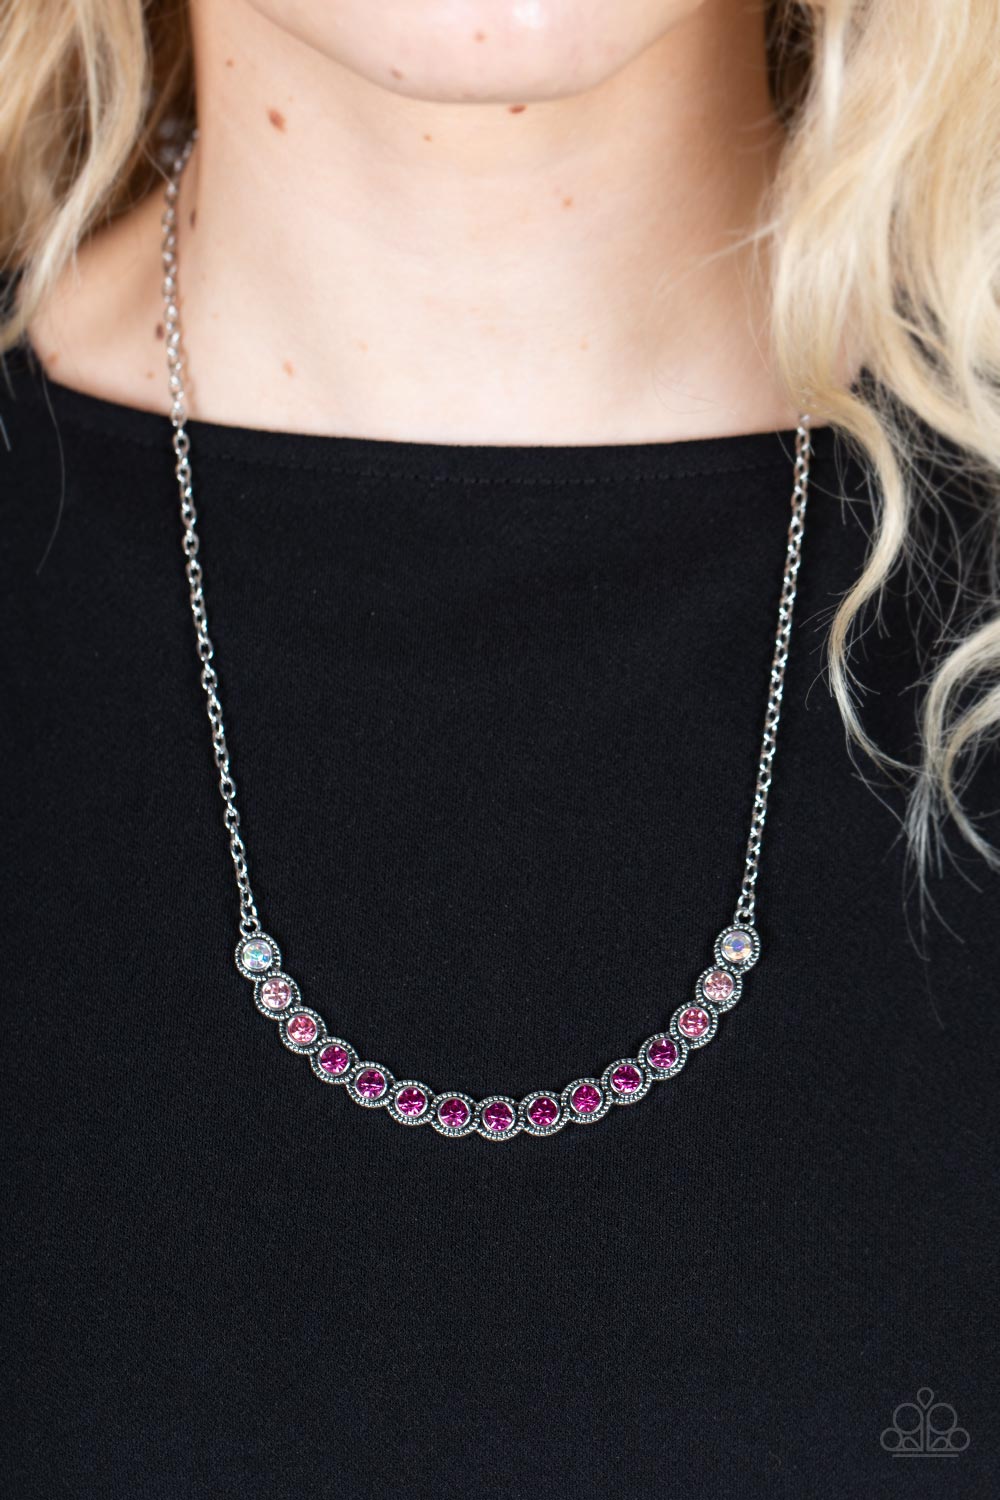 Paparazzi -Throwing SHADES - Pink Iridescent Necklace - Alies Bling Bar